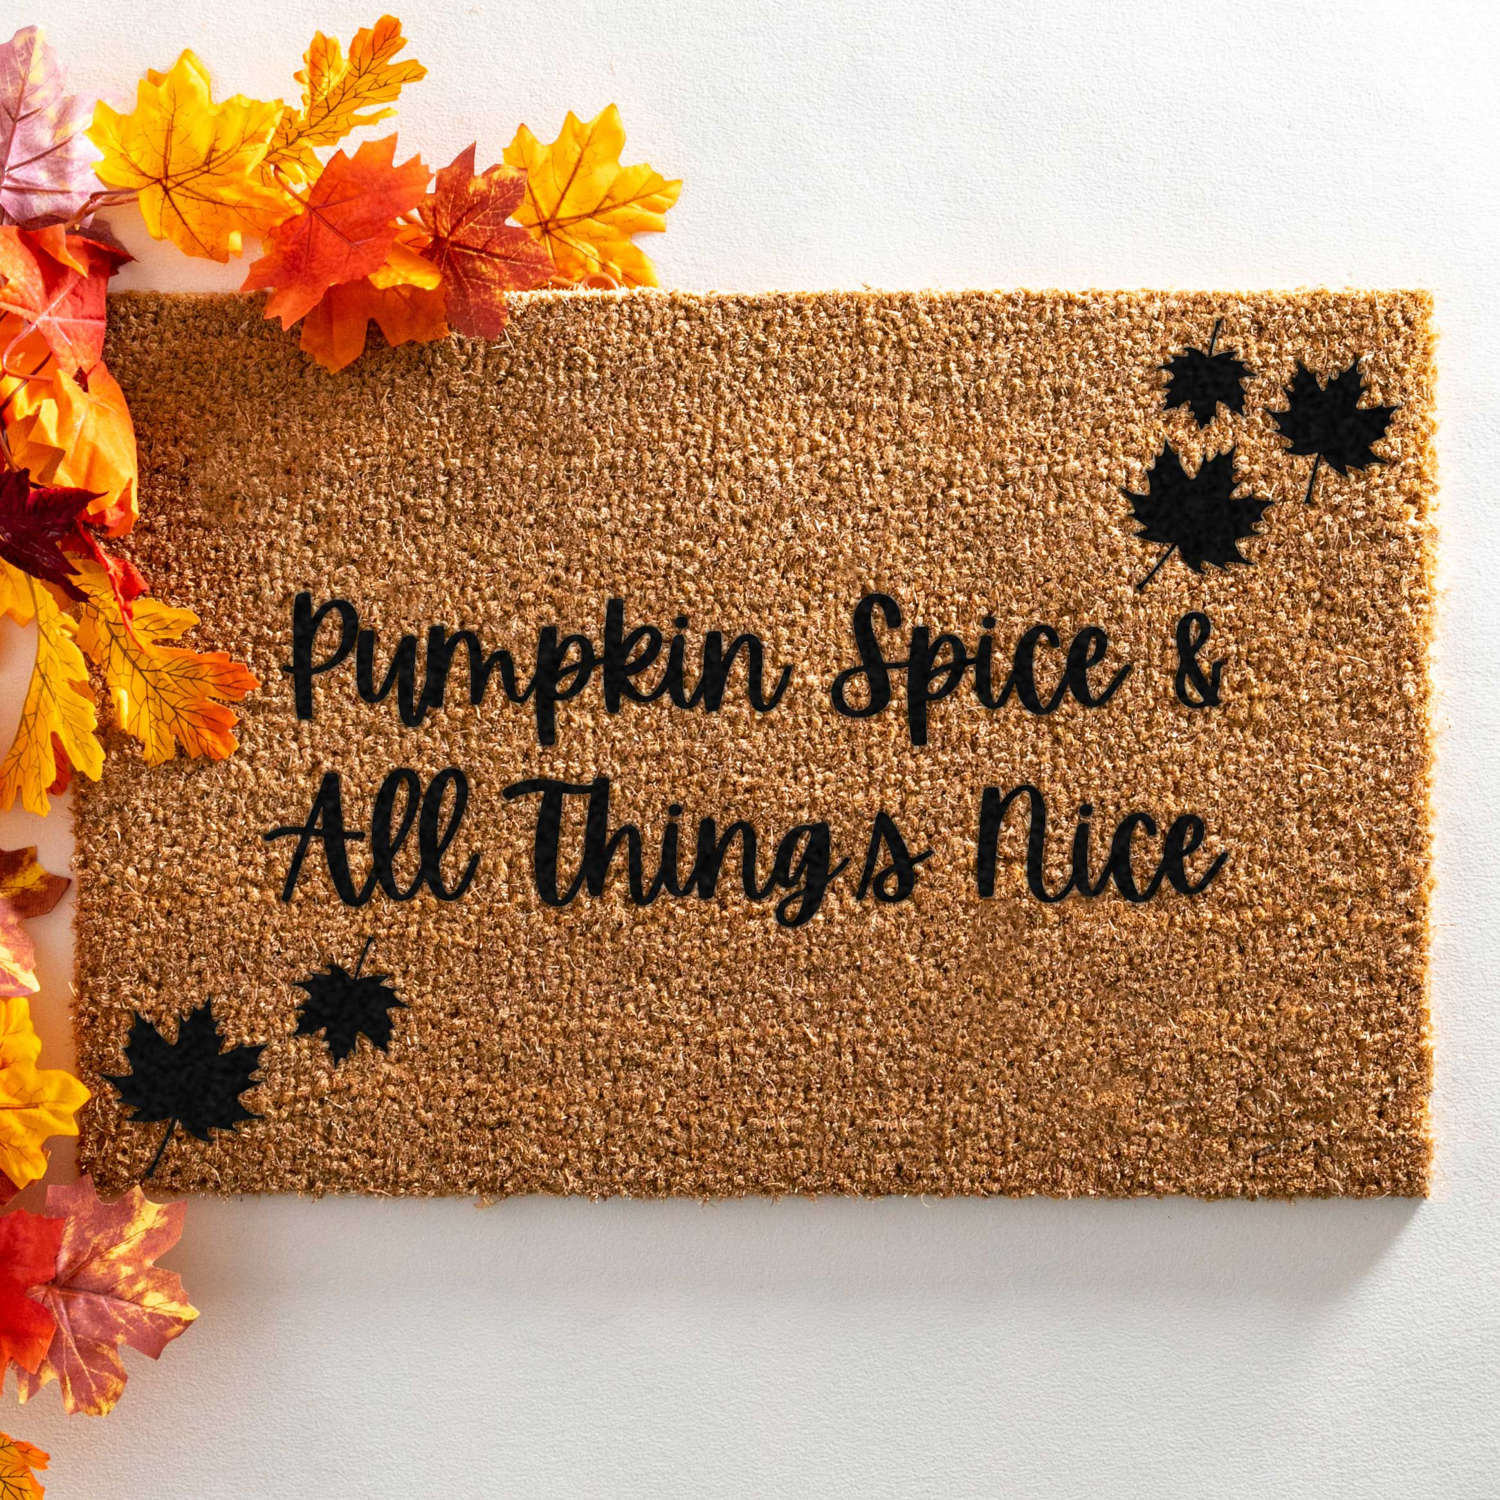 Pumpkin spice and all things nice design standard size doormat